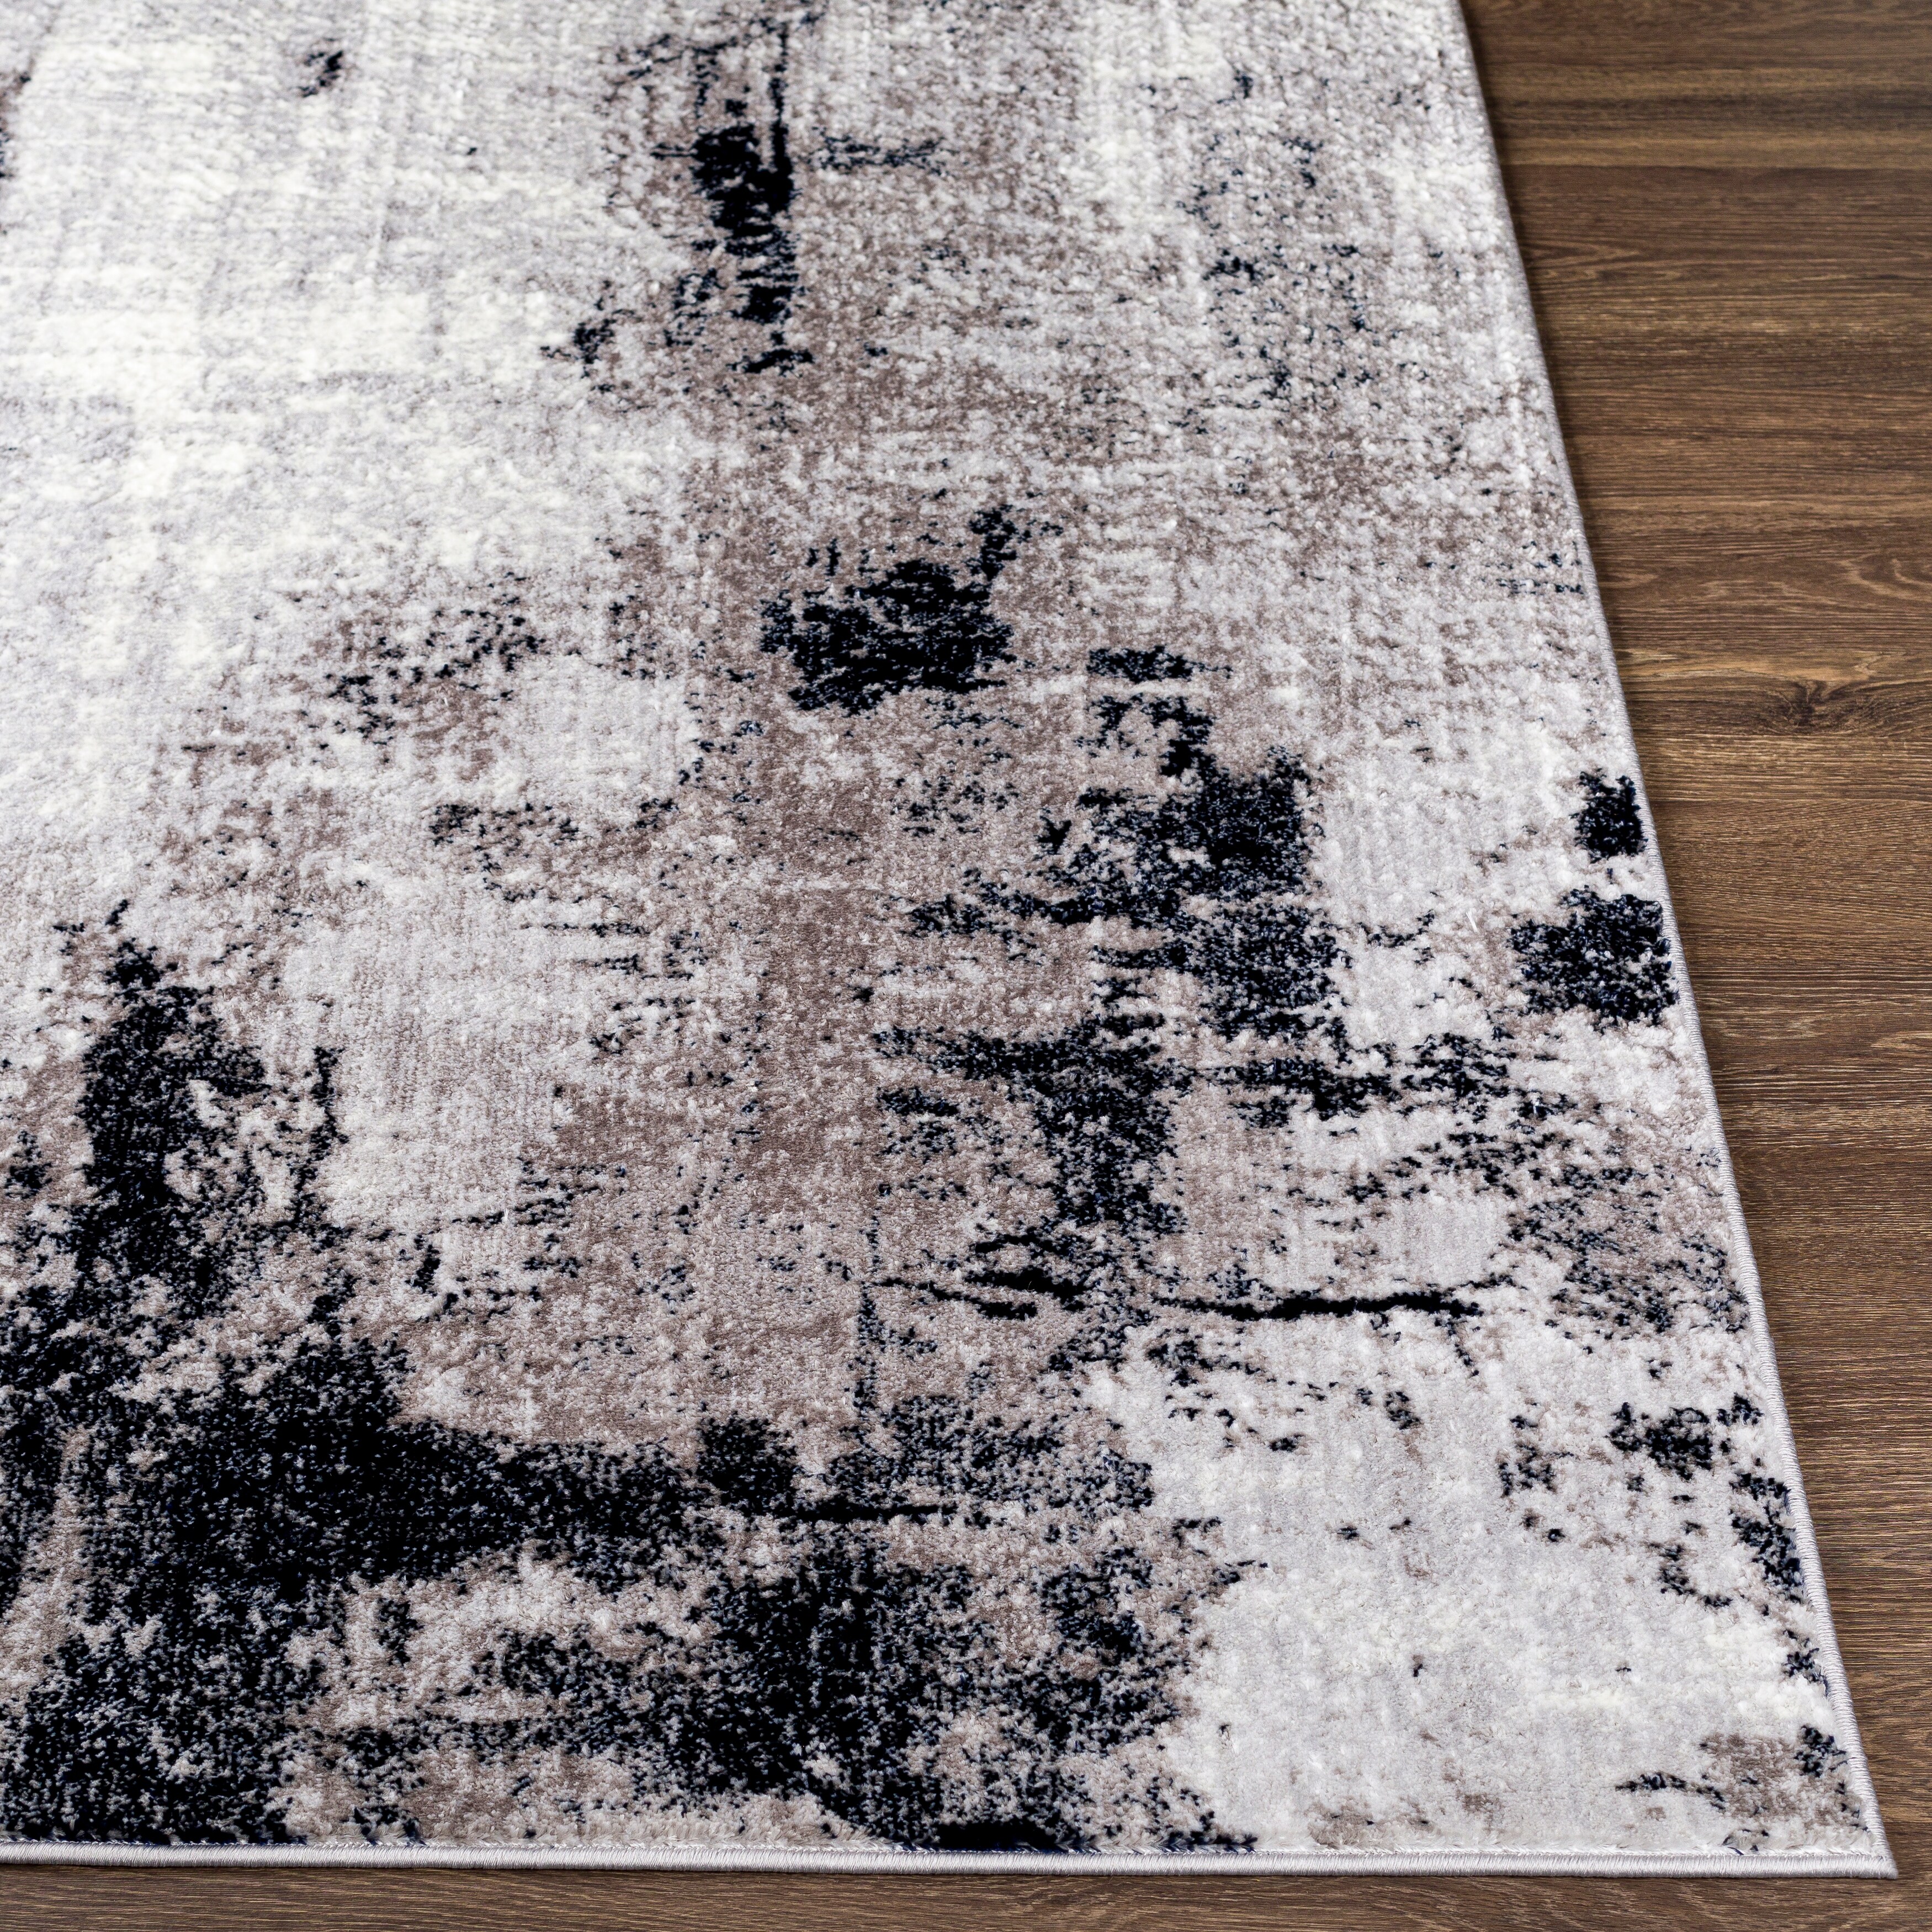 https://ak1.ostkcdn.com/images/products/is/images/direct/782783a0baa621eb267aa36ca77a97fcd50f39bc/Cooke-Industrial-Abstract-Polyester-Area-Rug.jpg